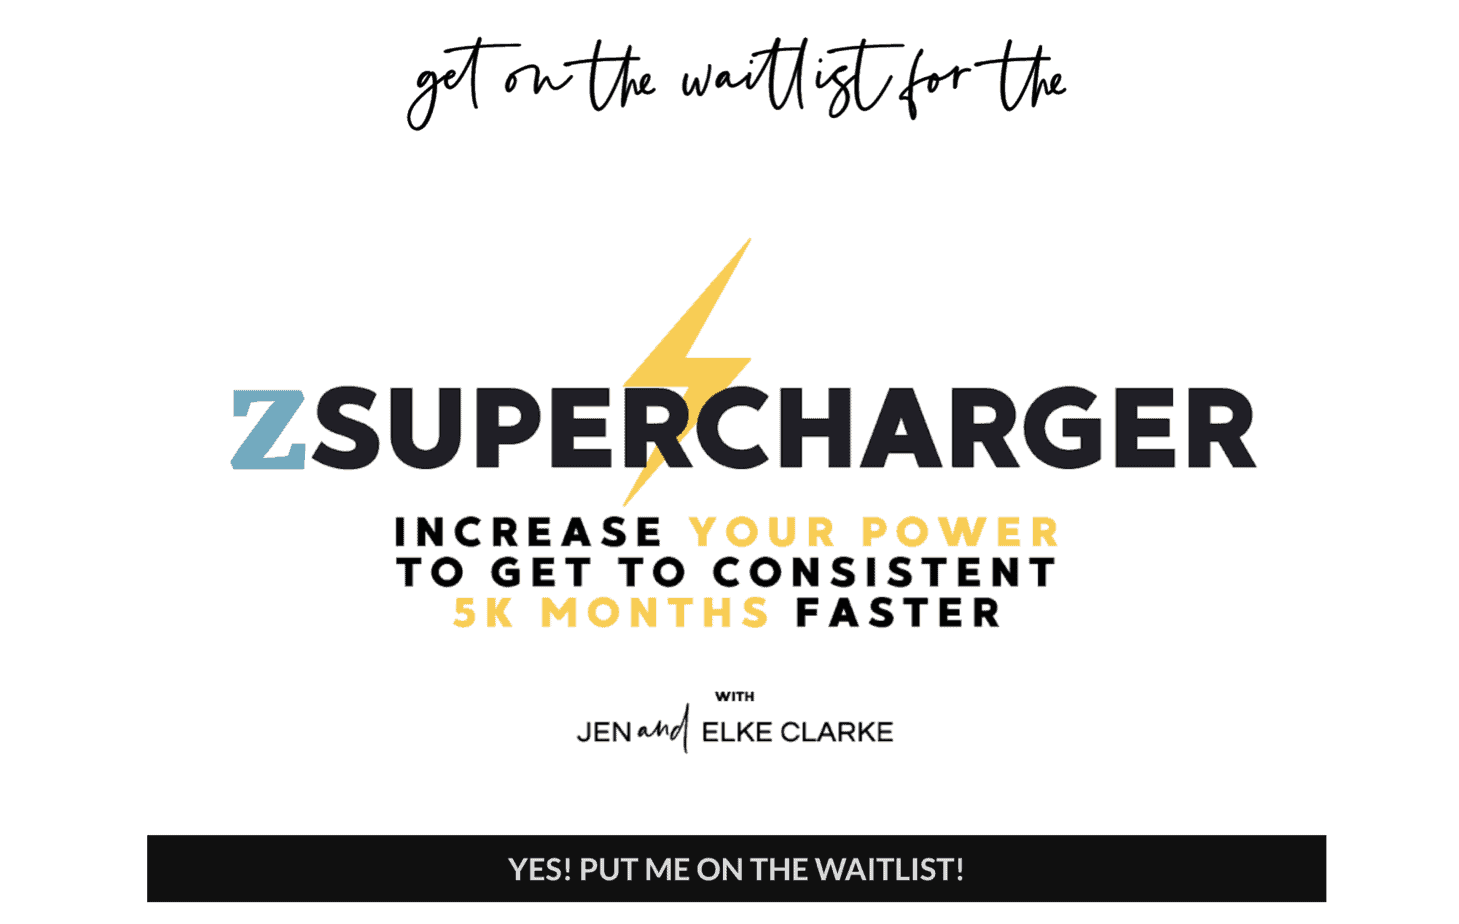 Get on the waitlist for the New Zazzle Program The zSupercharger with Jen and Elke Clarke Zazzle experts